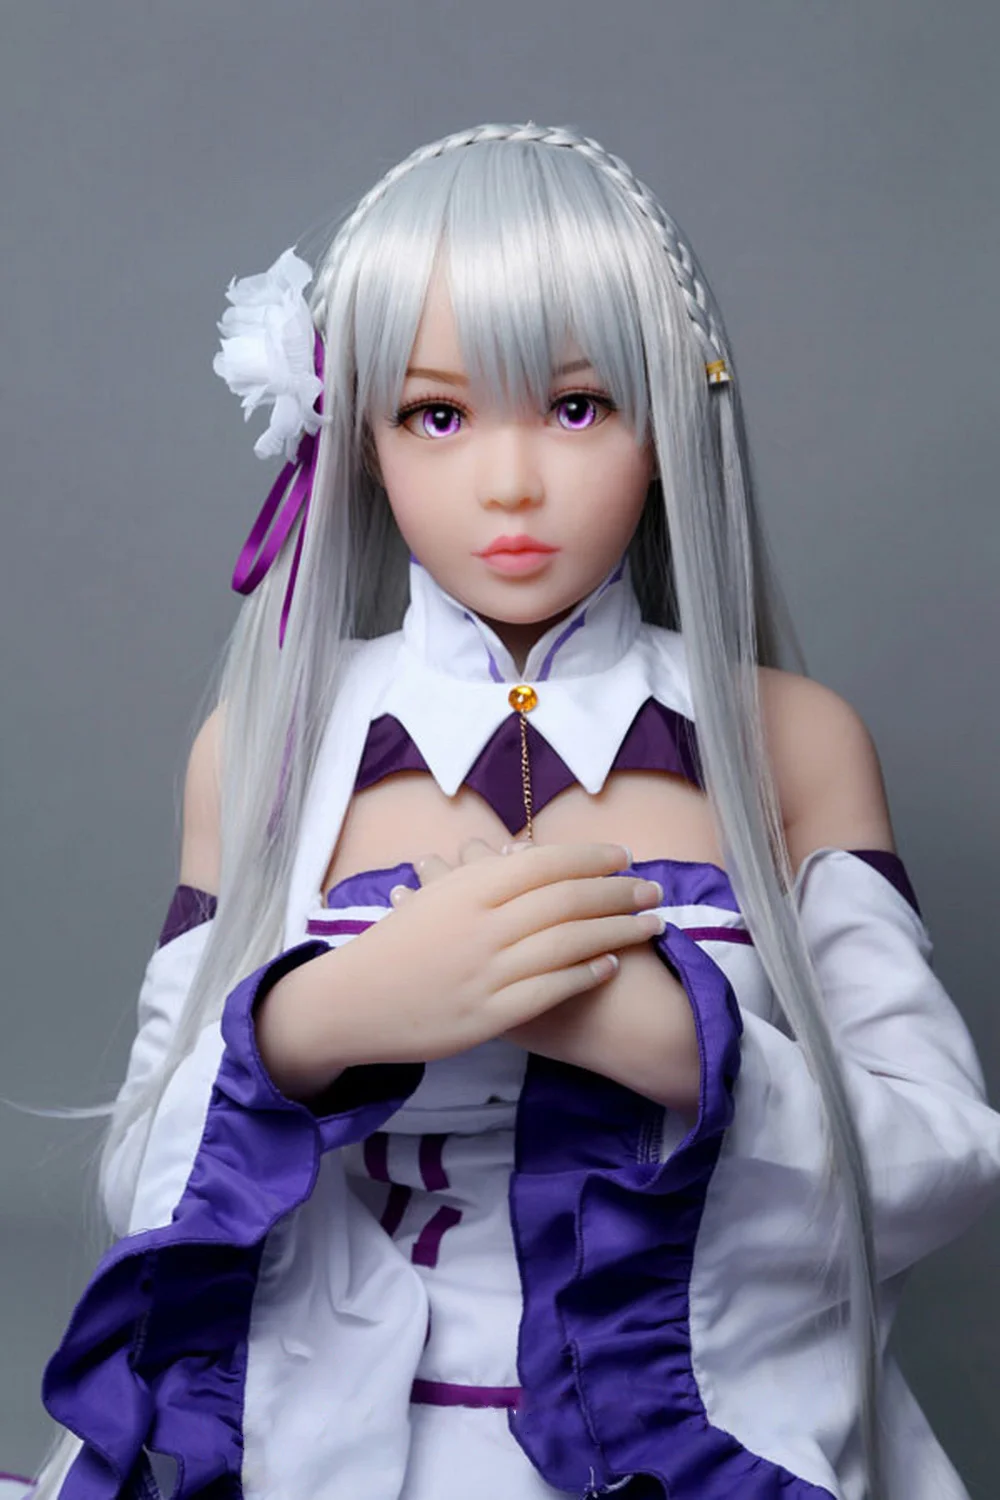 Sex doll with hands on chest